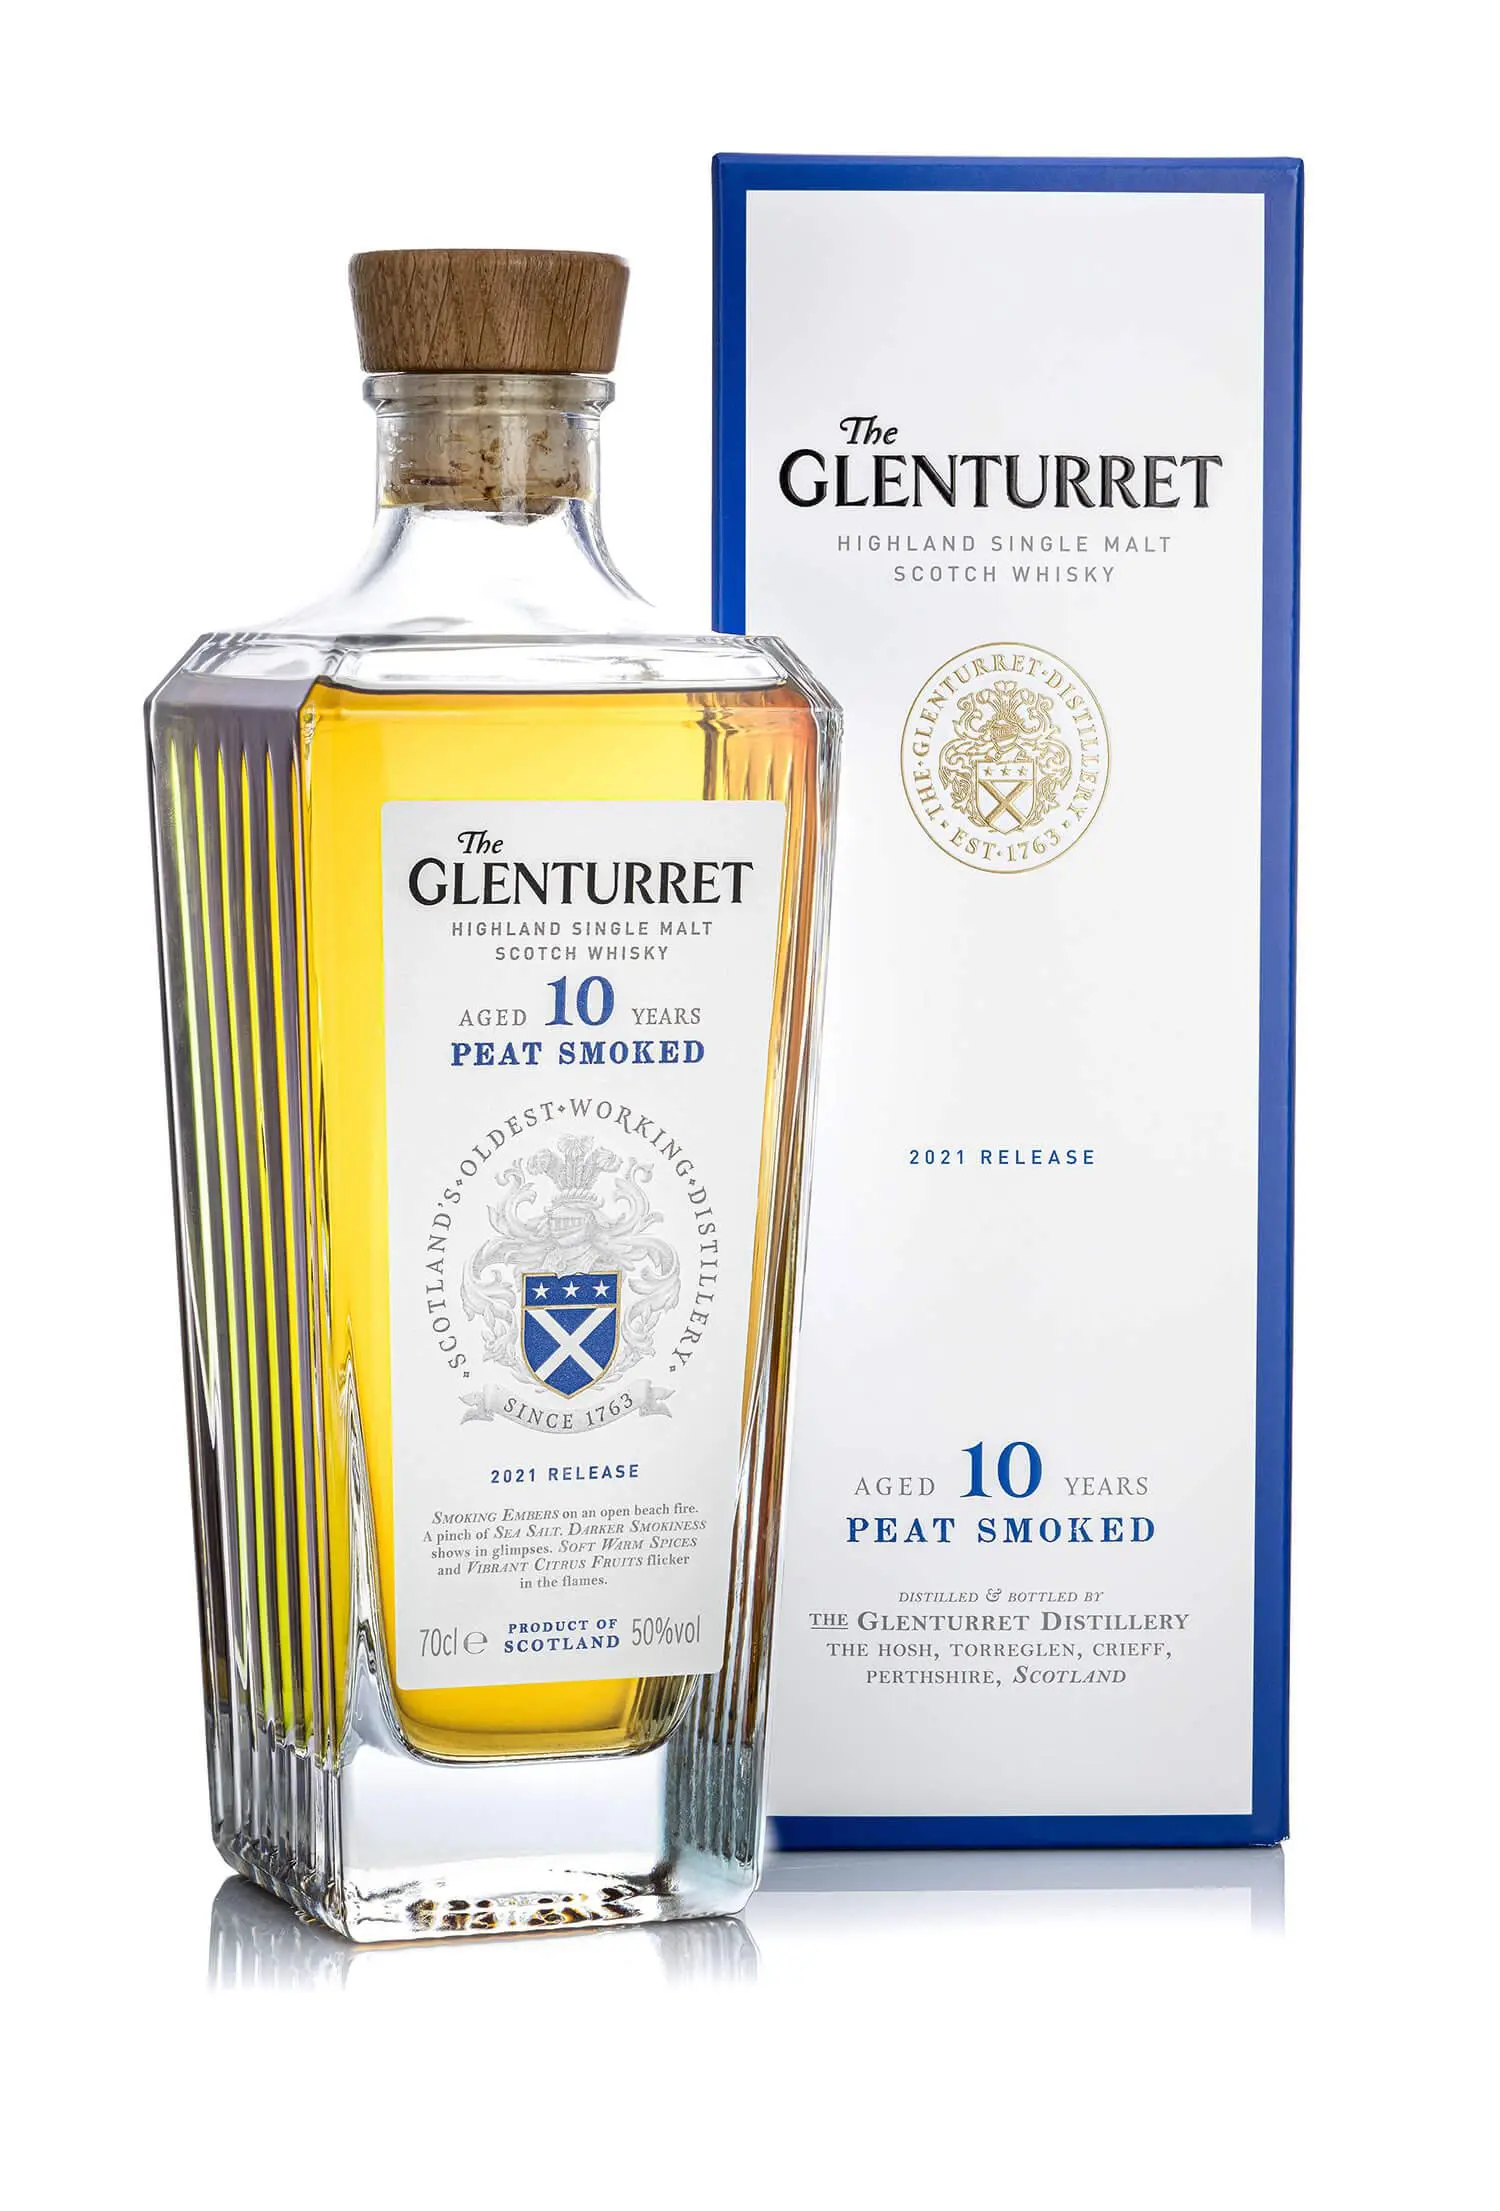 glenturret 10 year old peat smoked review - Is all Scotch smoked with peat